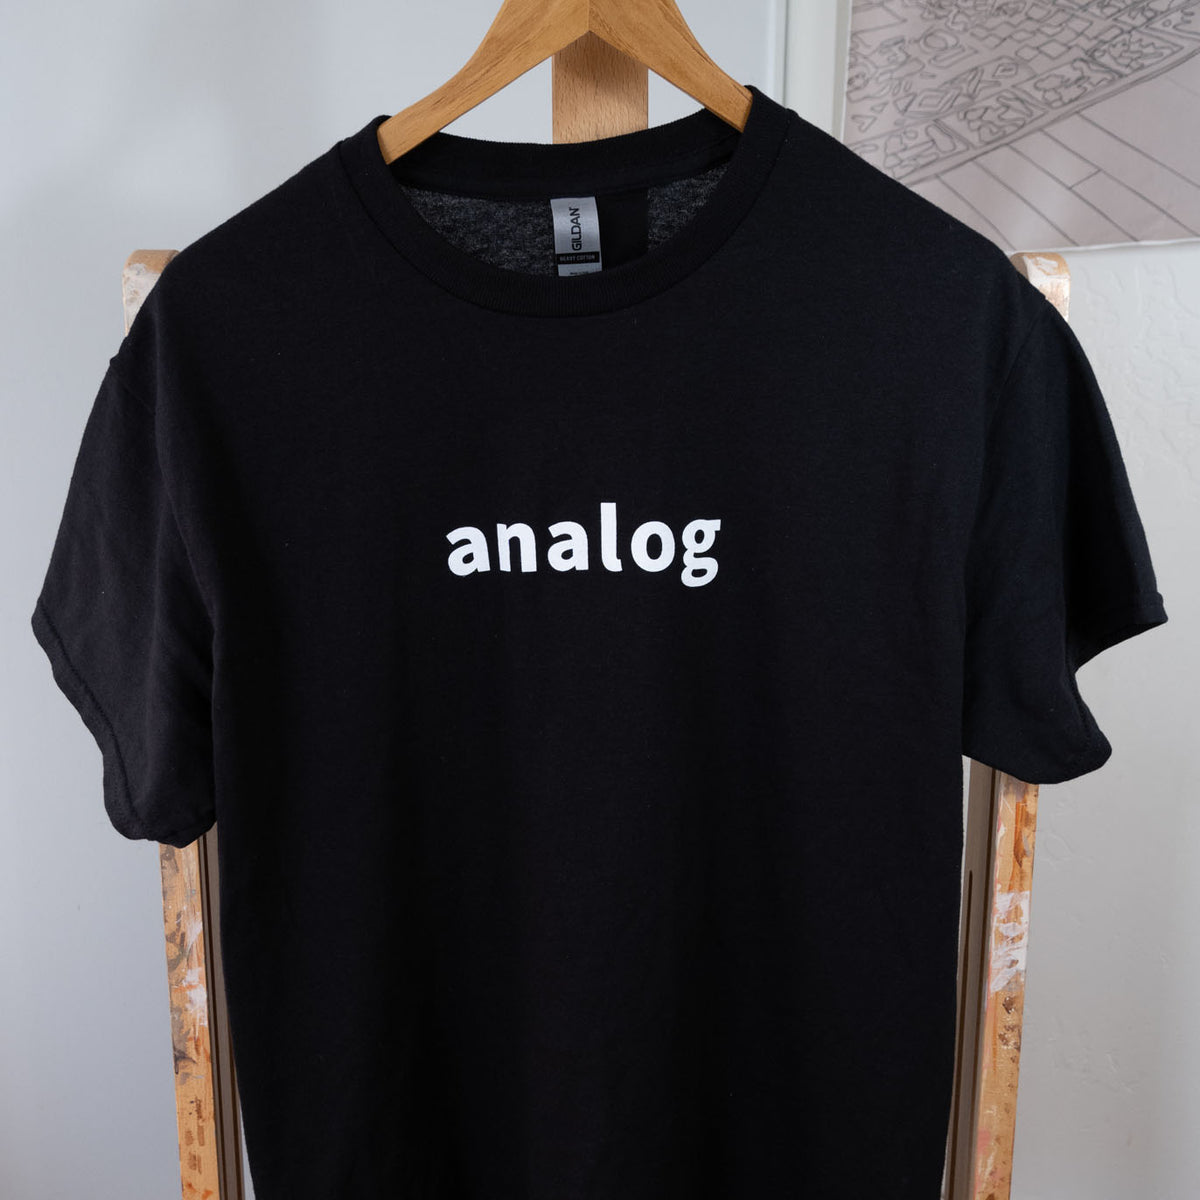 A black Analog T-Shirt with the word analog on it, inspired by Blackwing pencils.